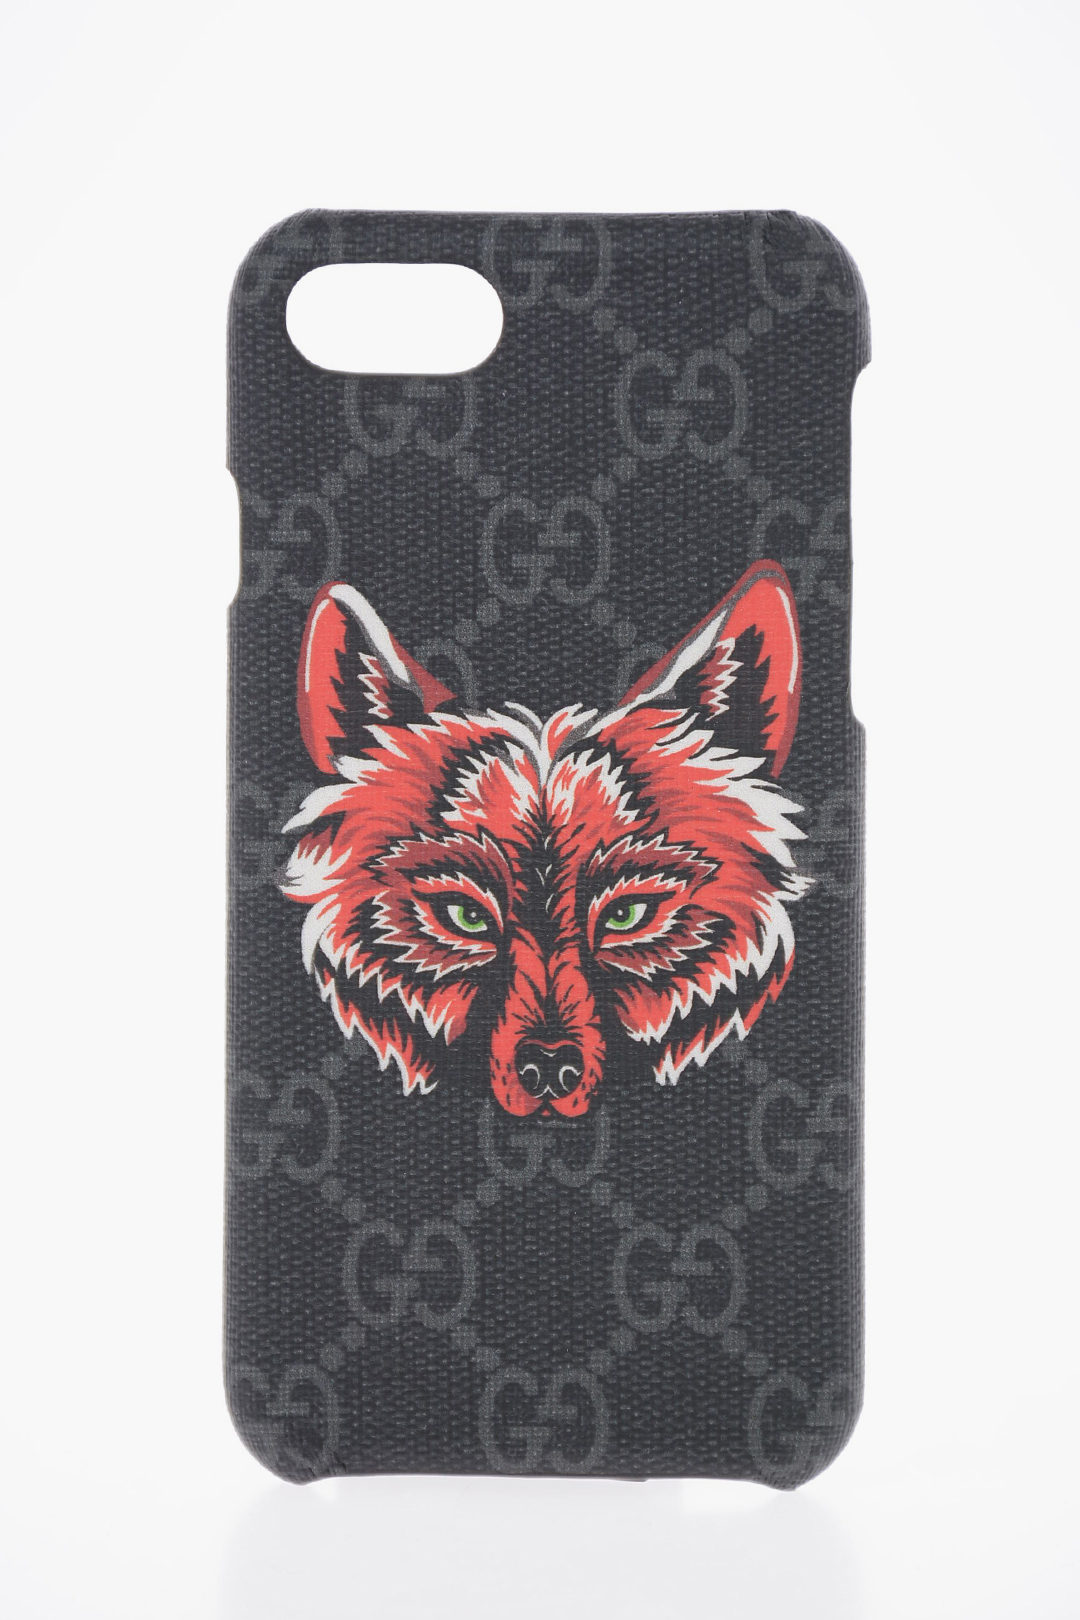 Gucci Wolf Printed Iphone 8 Cover Unisex Men Women Glamood Outlet